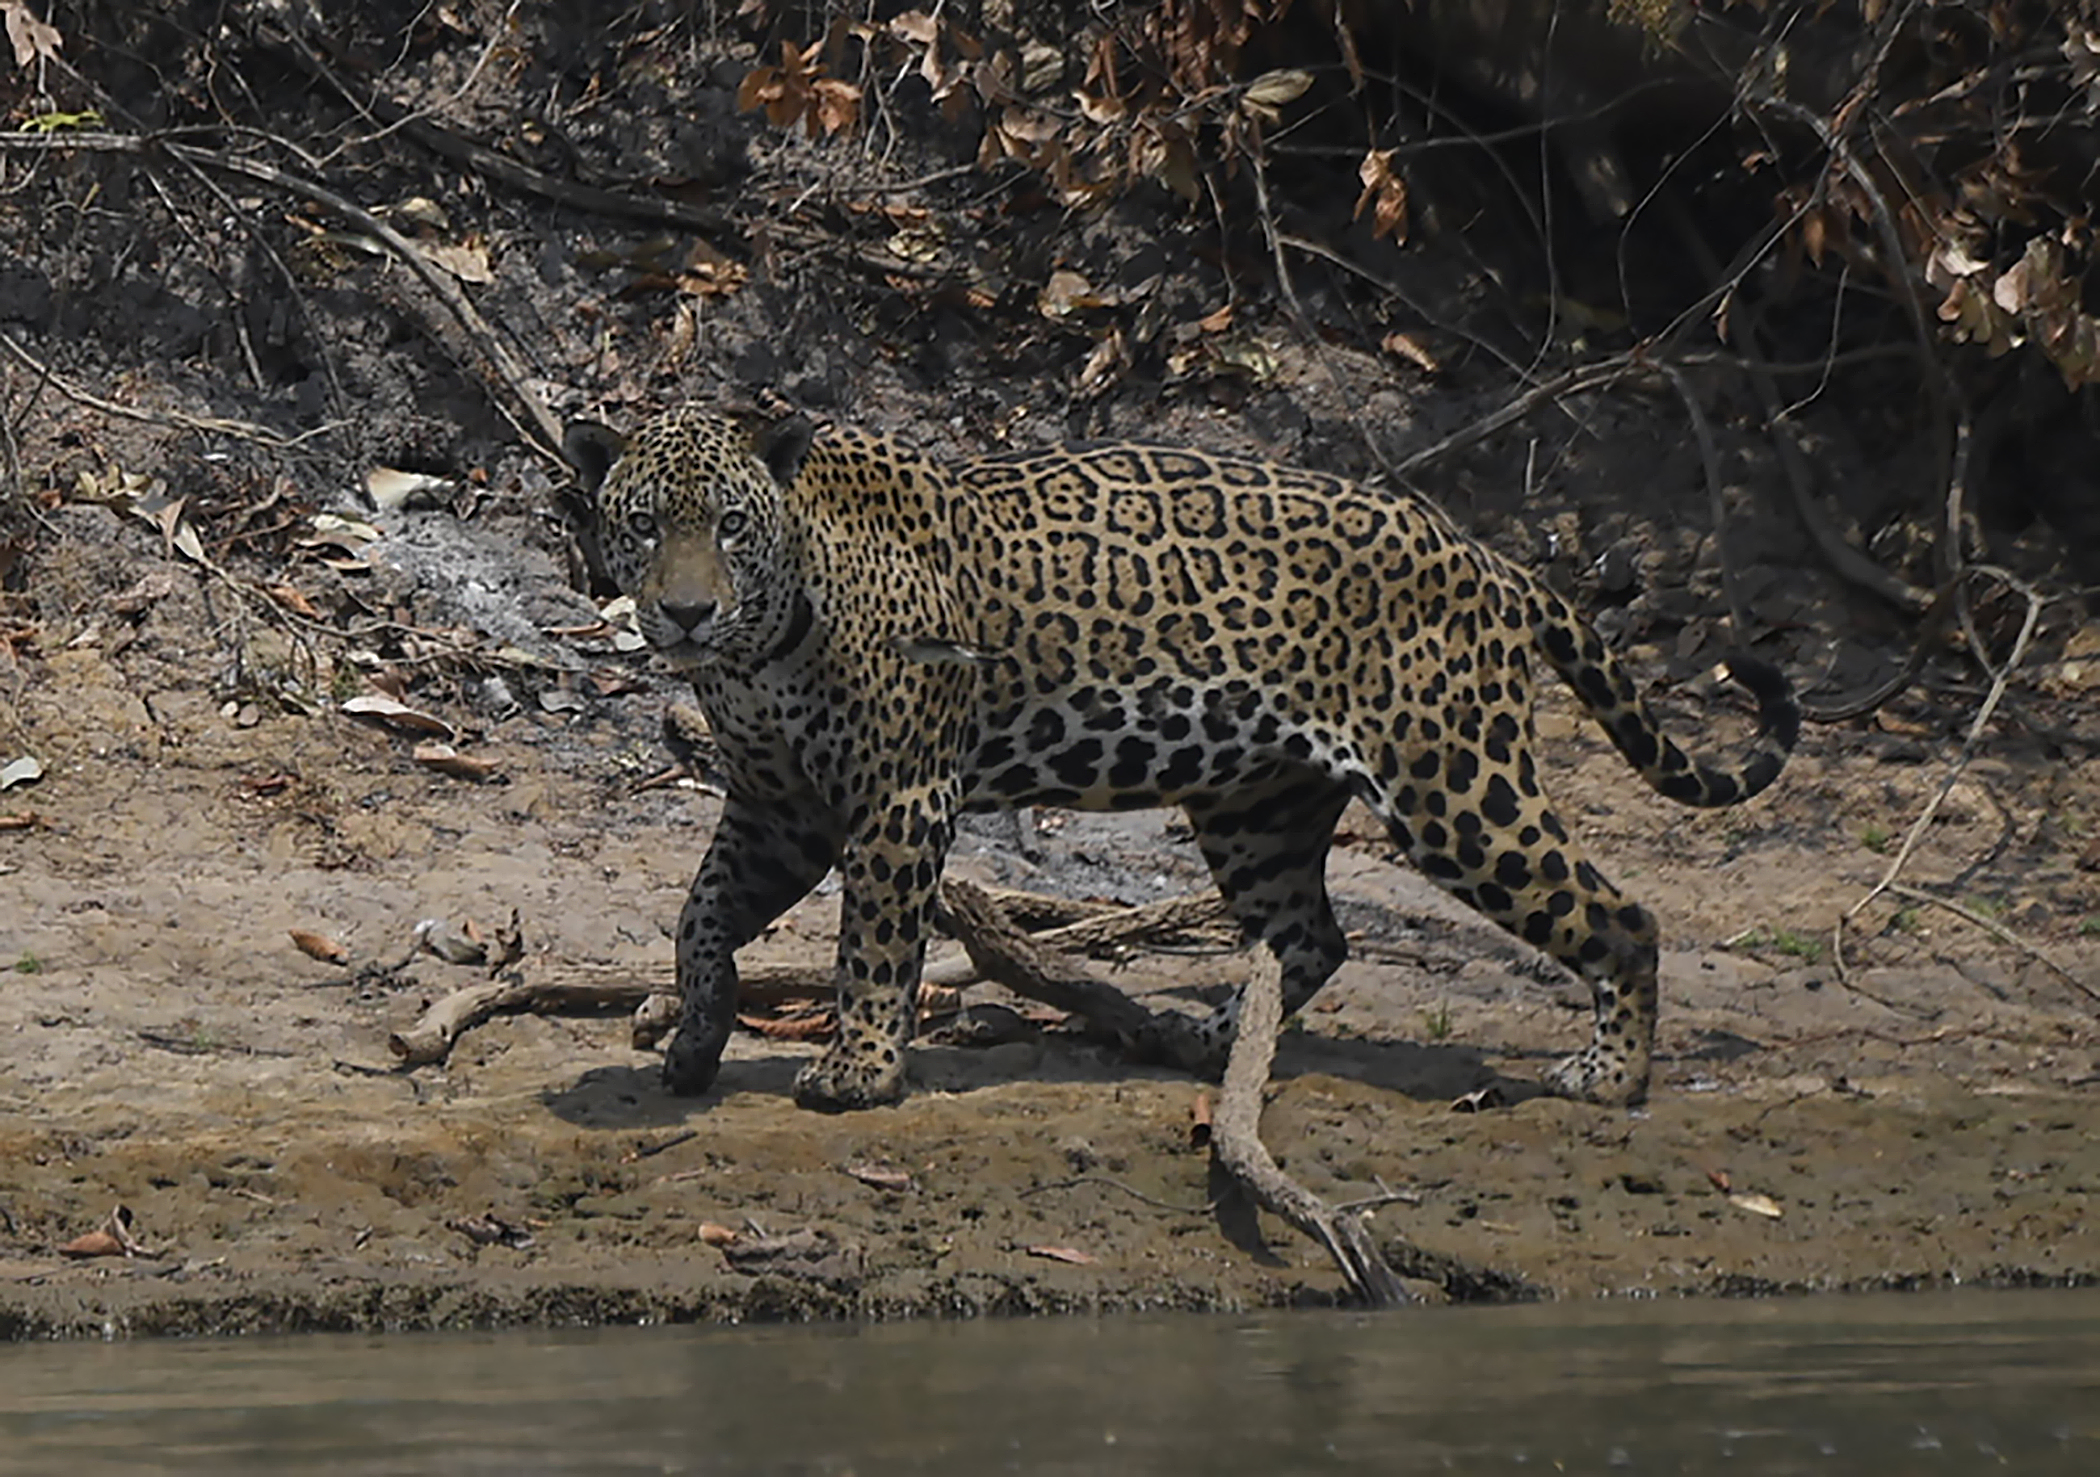 An injured adult male jaguar walks along the bank of a river at the Encontros das Aguas Park, in the Porto Jofre region of the Pantanal, near the Transpantaneira park road which crosses the world's largest tropical wetland, in Mato Grosso State, Brazil, on September 15, 2020. - The Pantanal, a region famous for its wildlife, is suffering its worst fires in more than 47 years, destroying vast areas of vegetation and causing death of animals caught in the fire or smoke. (Photo by Mauro PIMENTEL / AFP) (Photo by MAURO PIMENTEL/AFP via Getty Images)